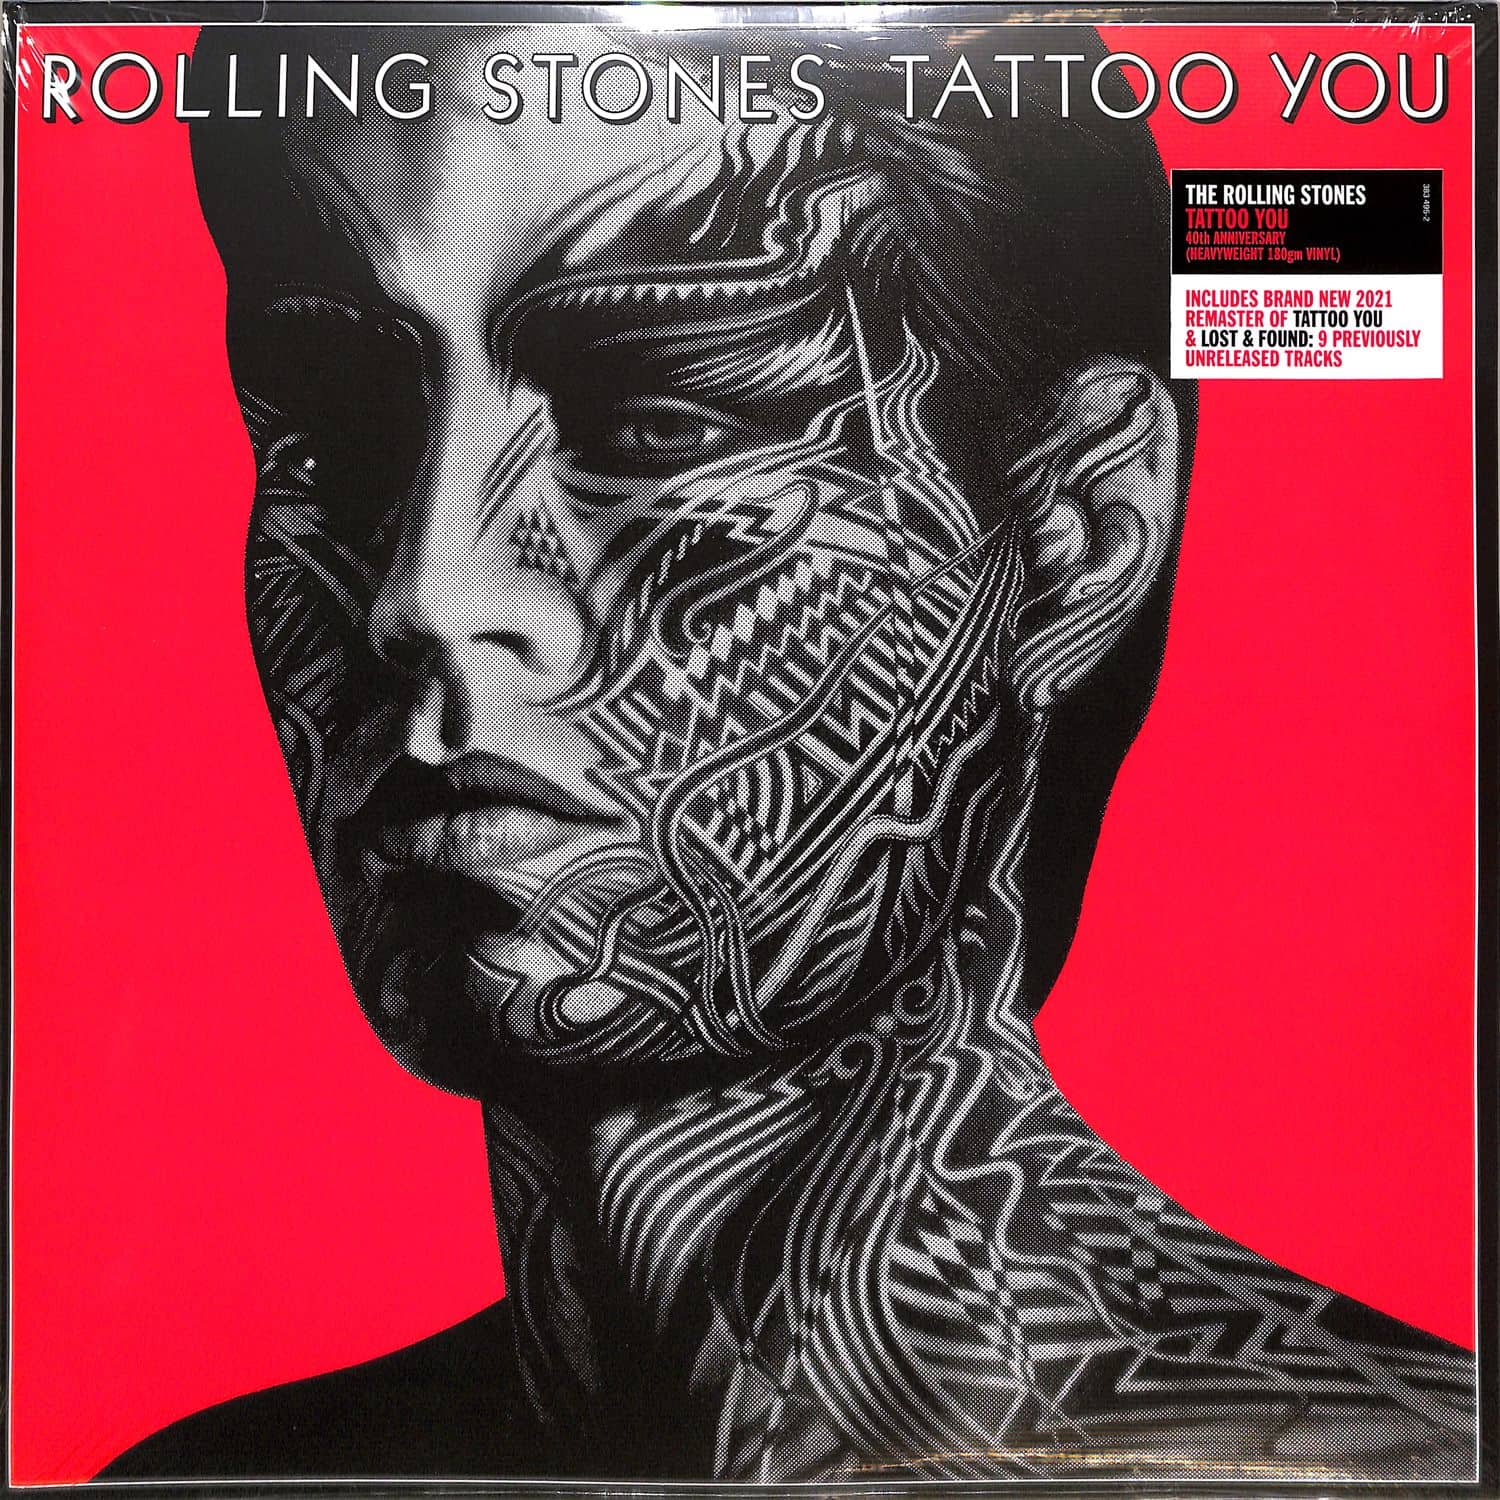 The Rolling Stones - TATTOO YOU-40TH ANNIVERSARY 